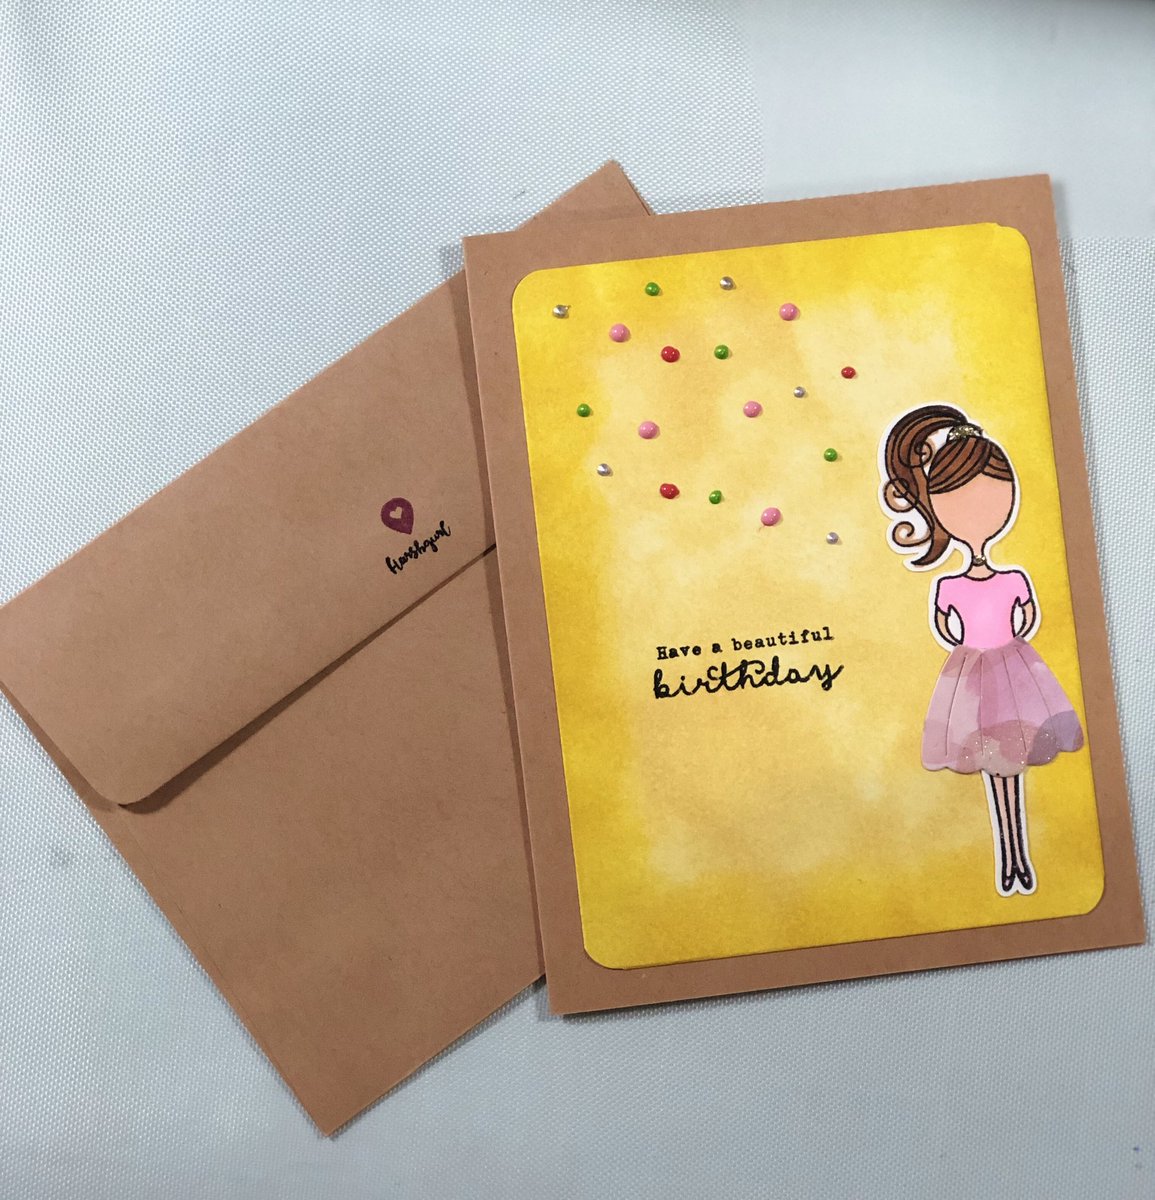 Cute stamps from @myheroarts #card #handmadecards #custommade #greetingcards #sayitinwriting #papercraft #customcards #papercrafting #cardmaking #cardmaker #paperlove #papercrafter #cardmaker #heroarts #rangerink #distressink #copicmarkers #copic